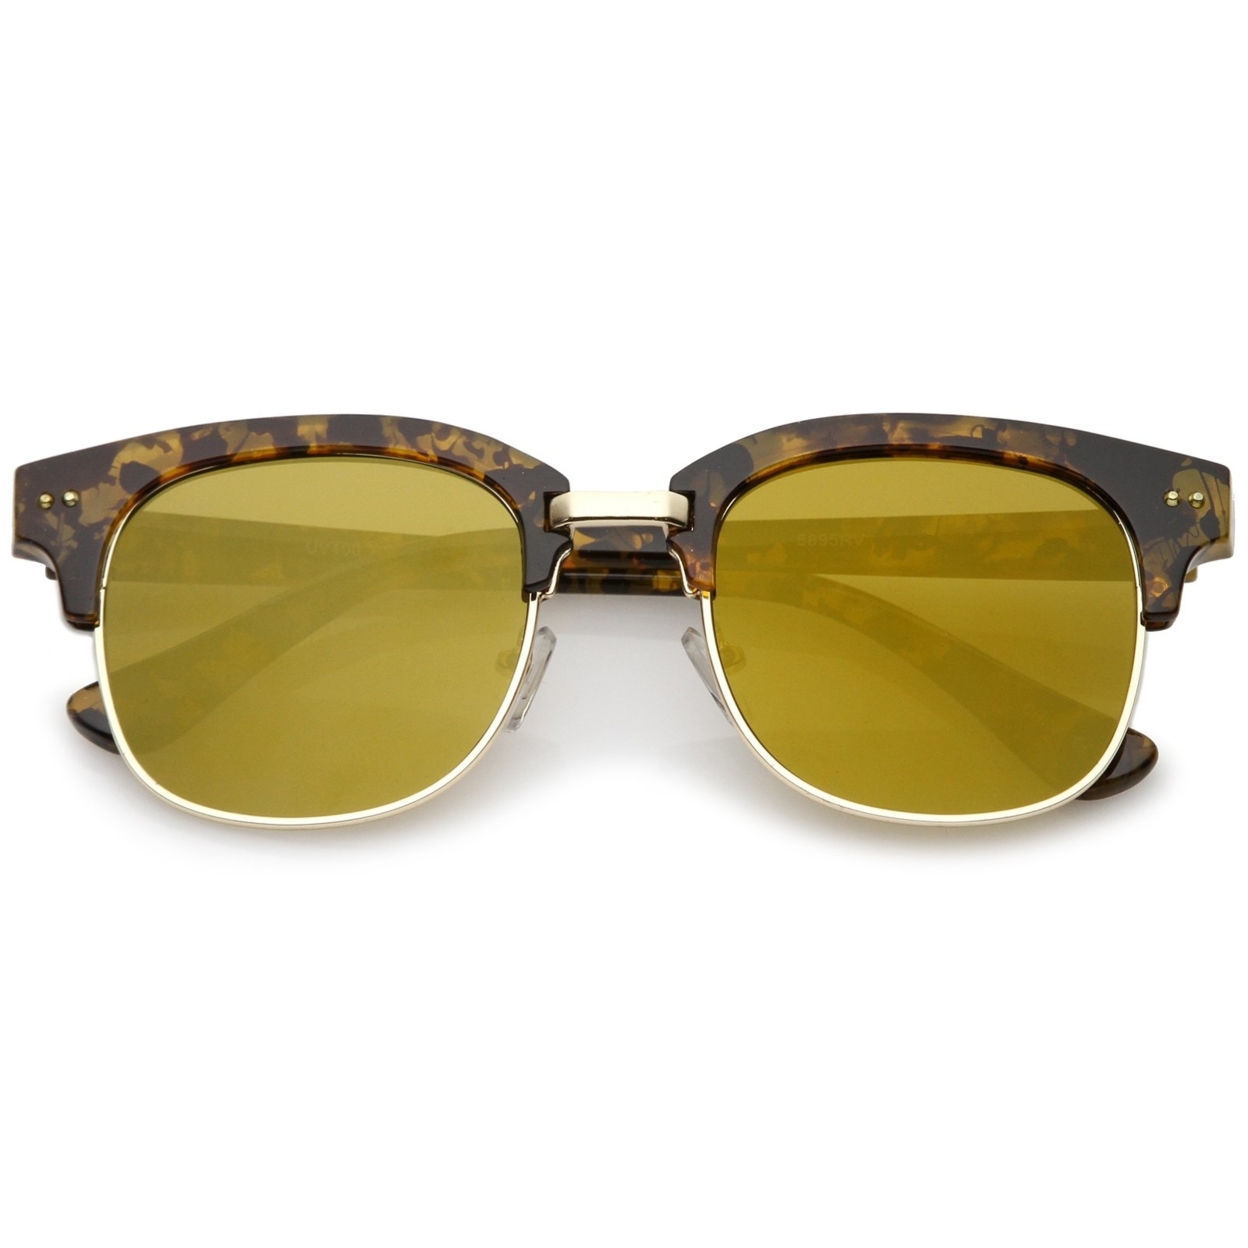 Modern Marble Print Horn Rimmed Mirrored Square Flat Lens Half Frame Sunglasses 51mm - Brown-Gold / Brown Mirror